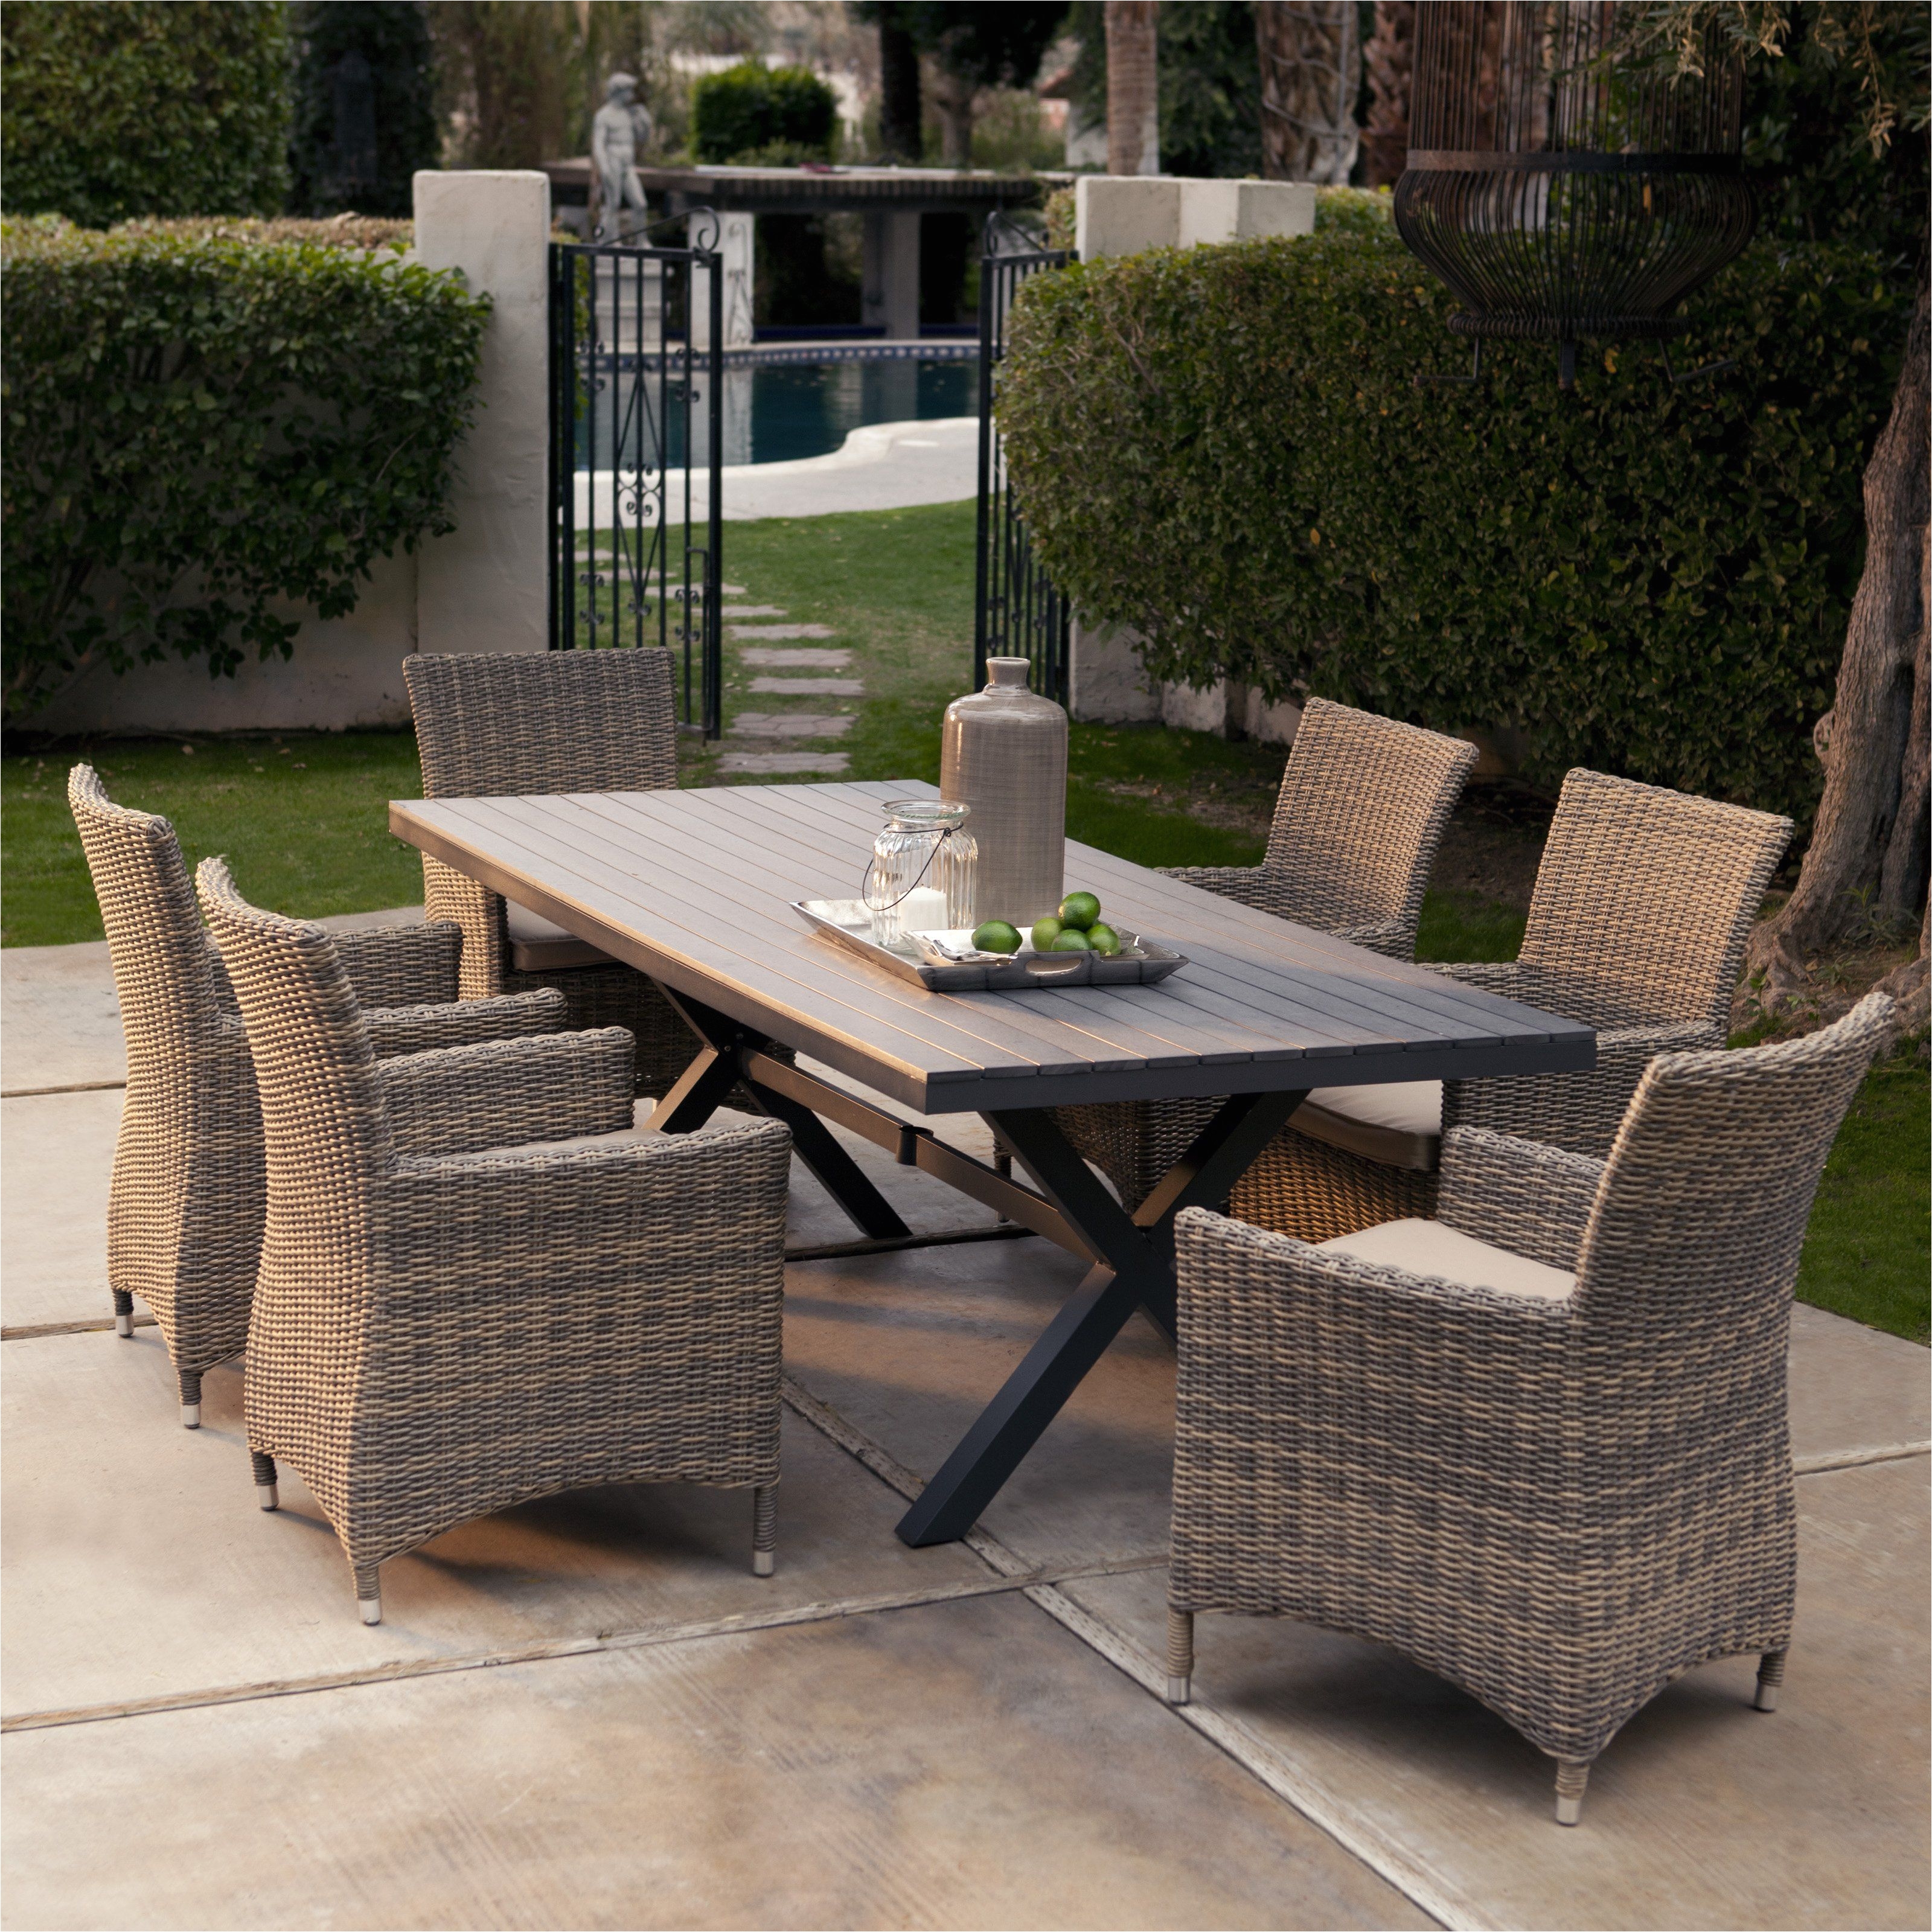 Gar Outdoor Chair Bella All Weather Wicker Patio Dining Set Seats 6 Patio Dining